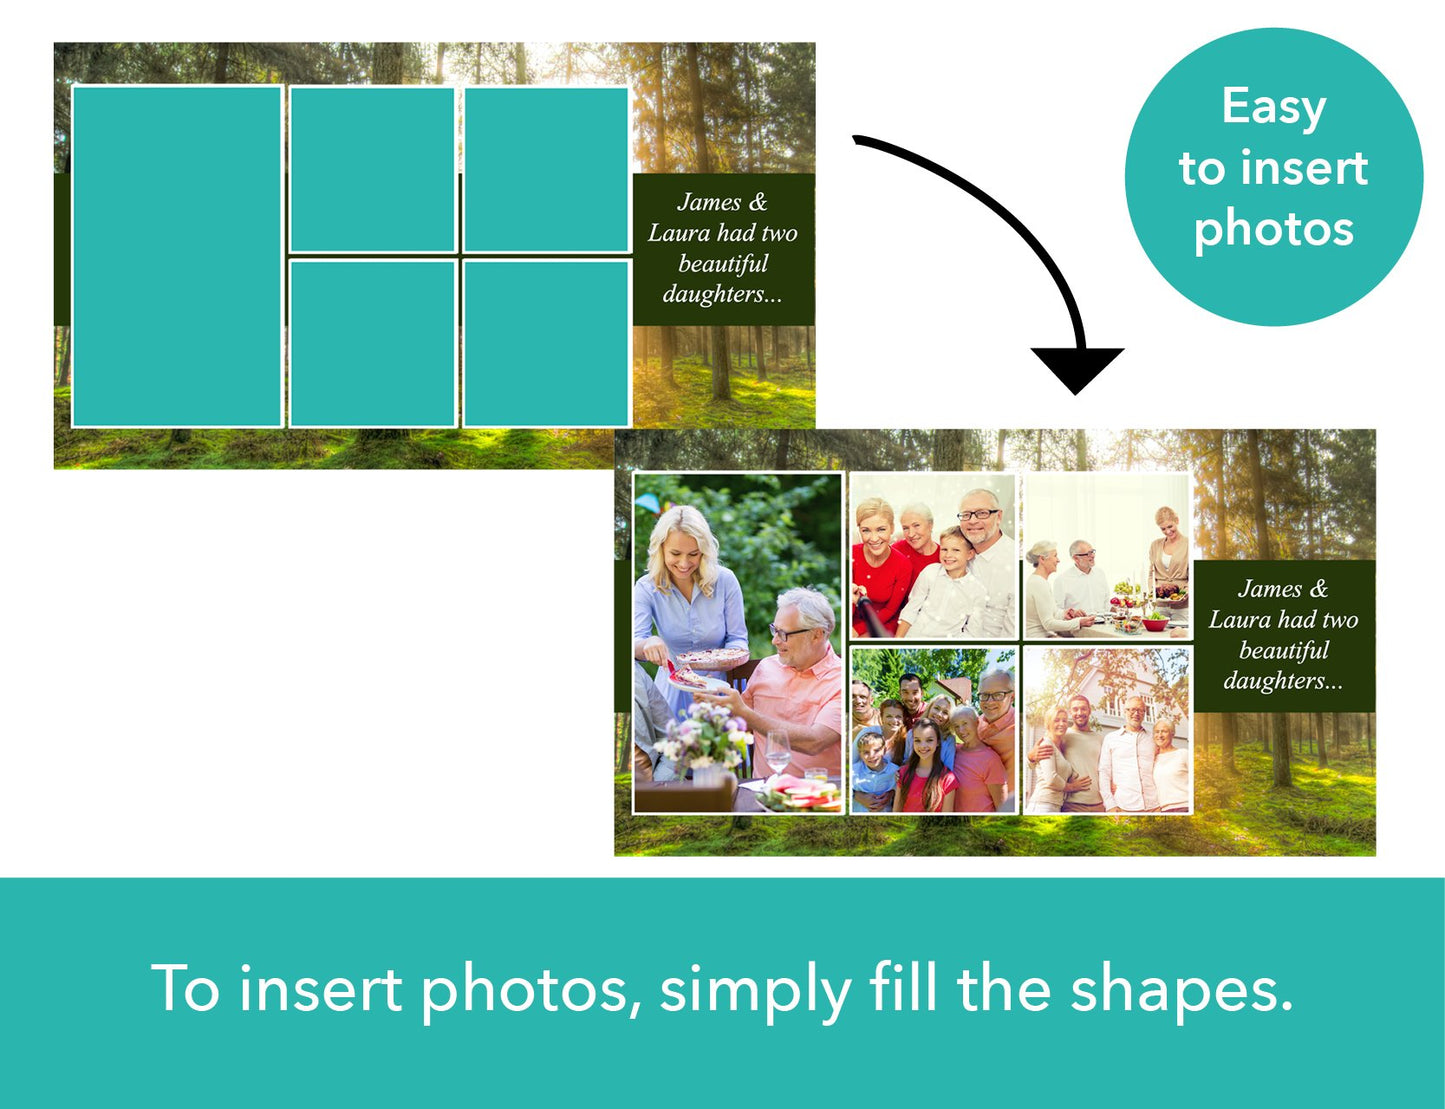 Forest Funeral Slide Show Template